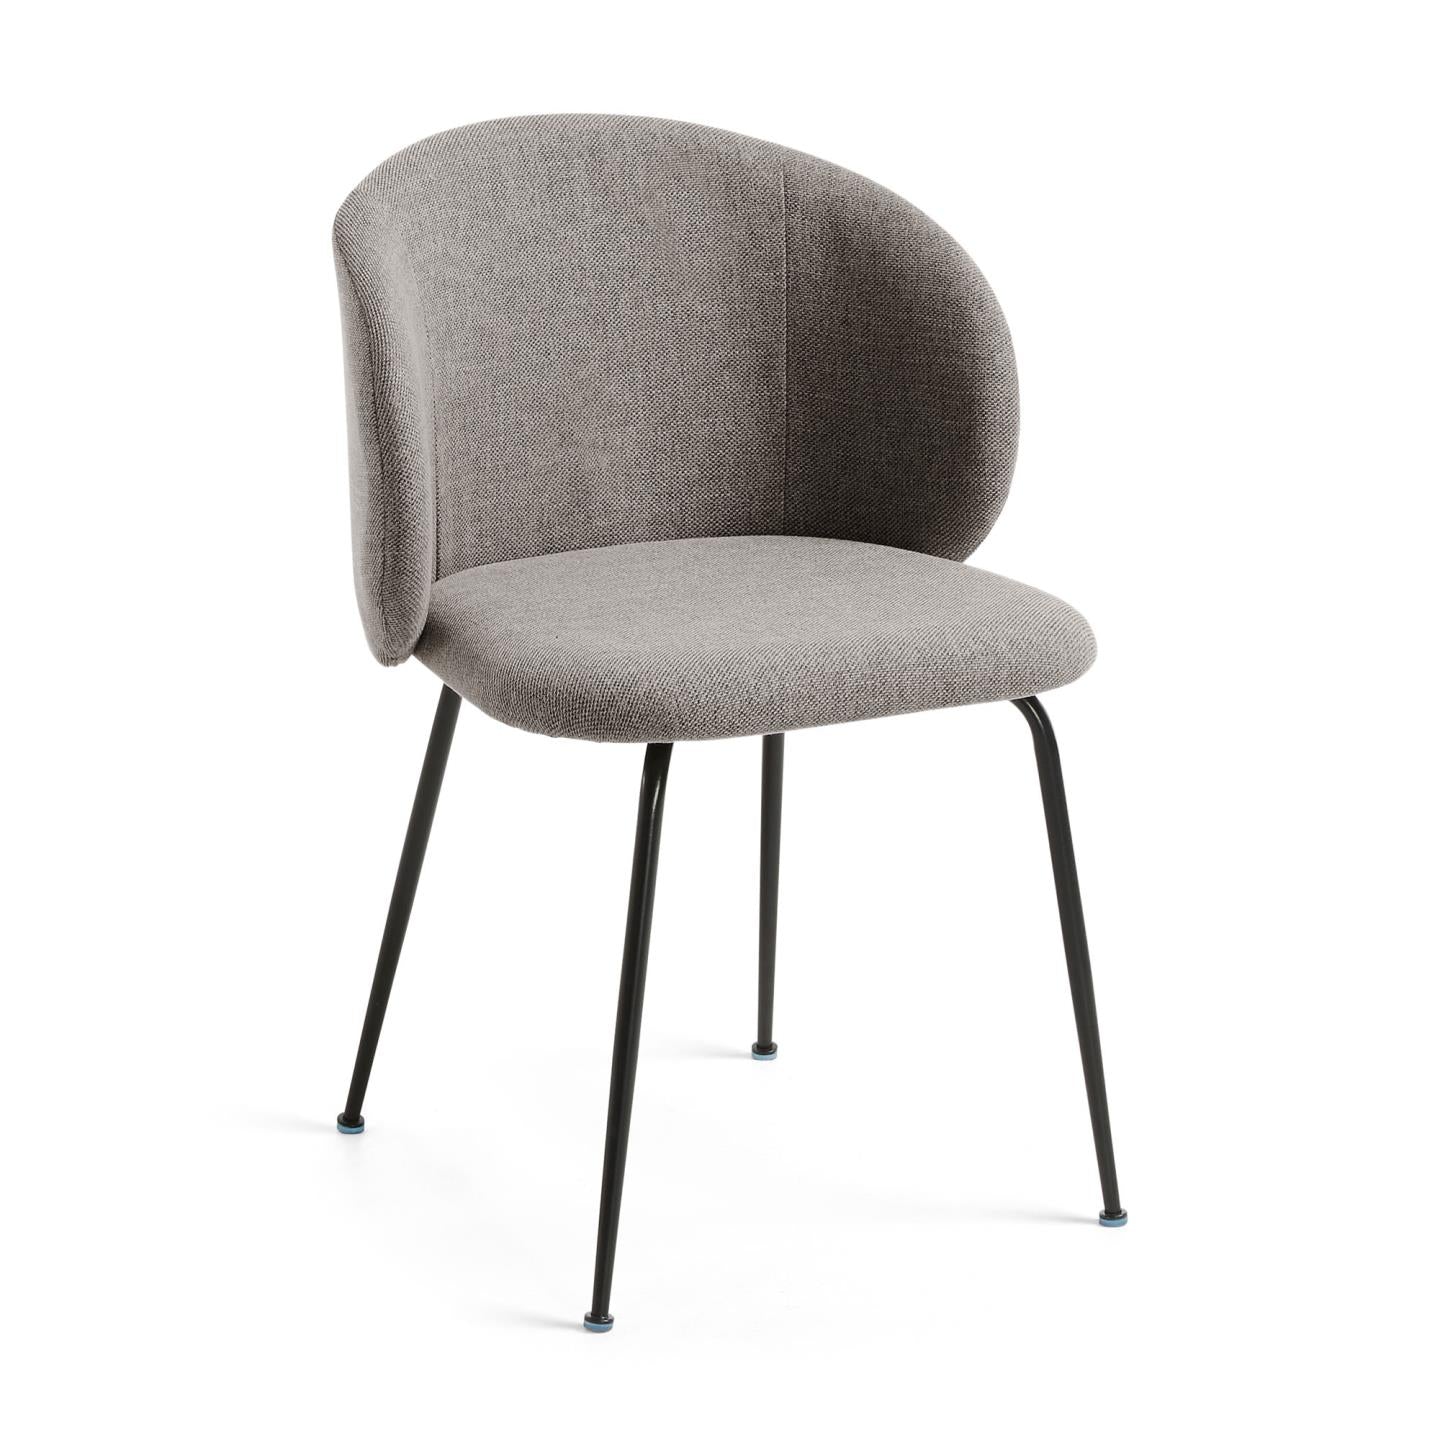 Minna light grey chair with steel legs with black finish